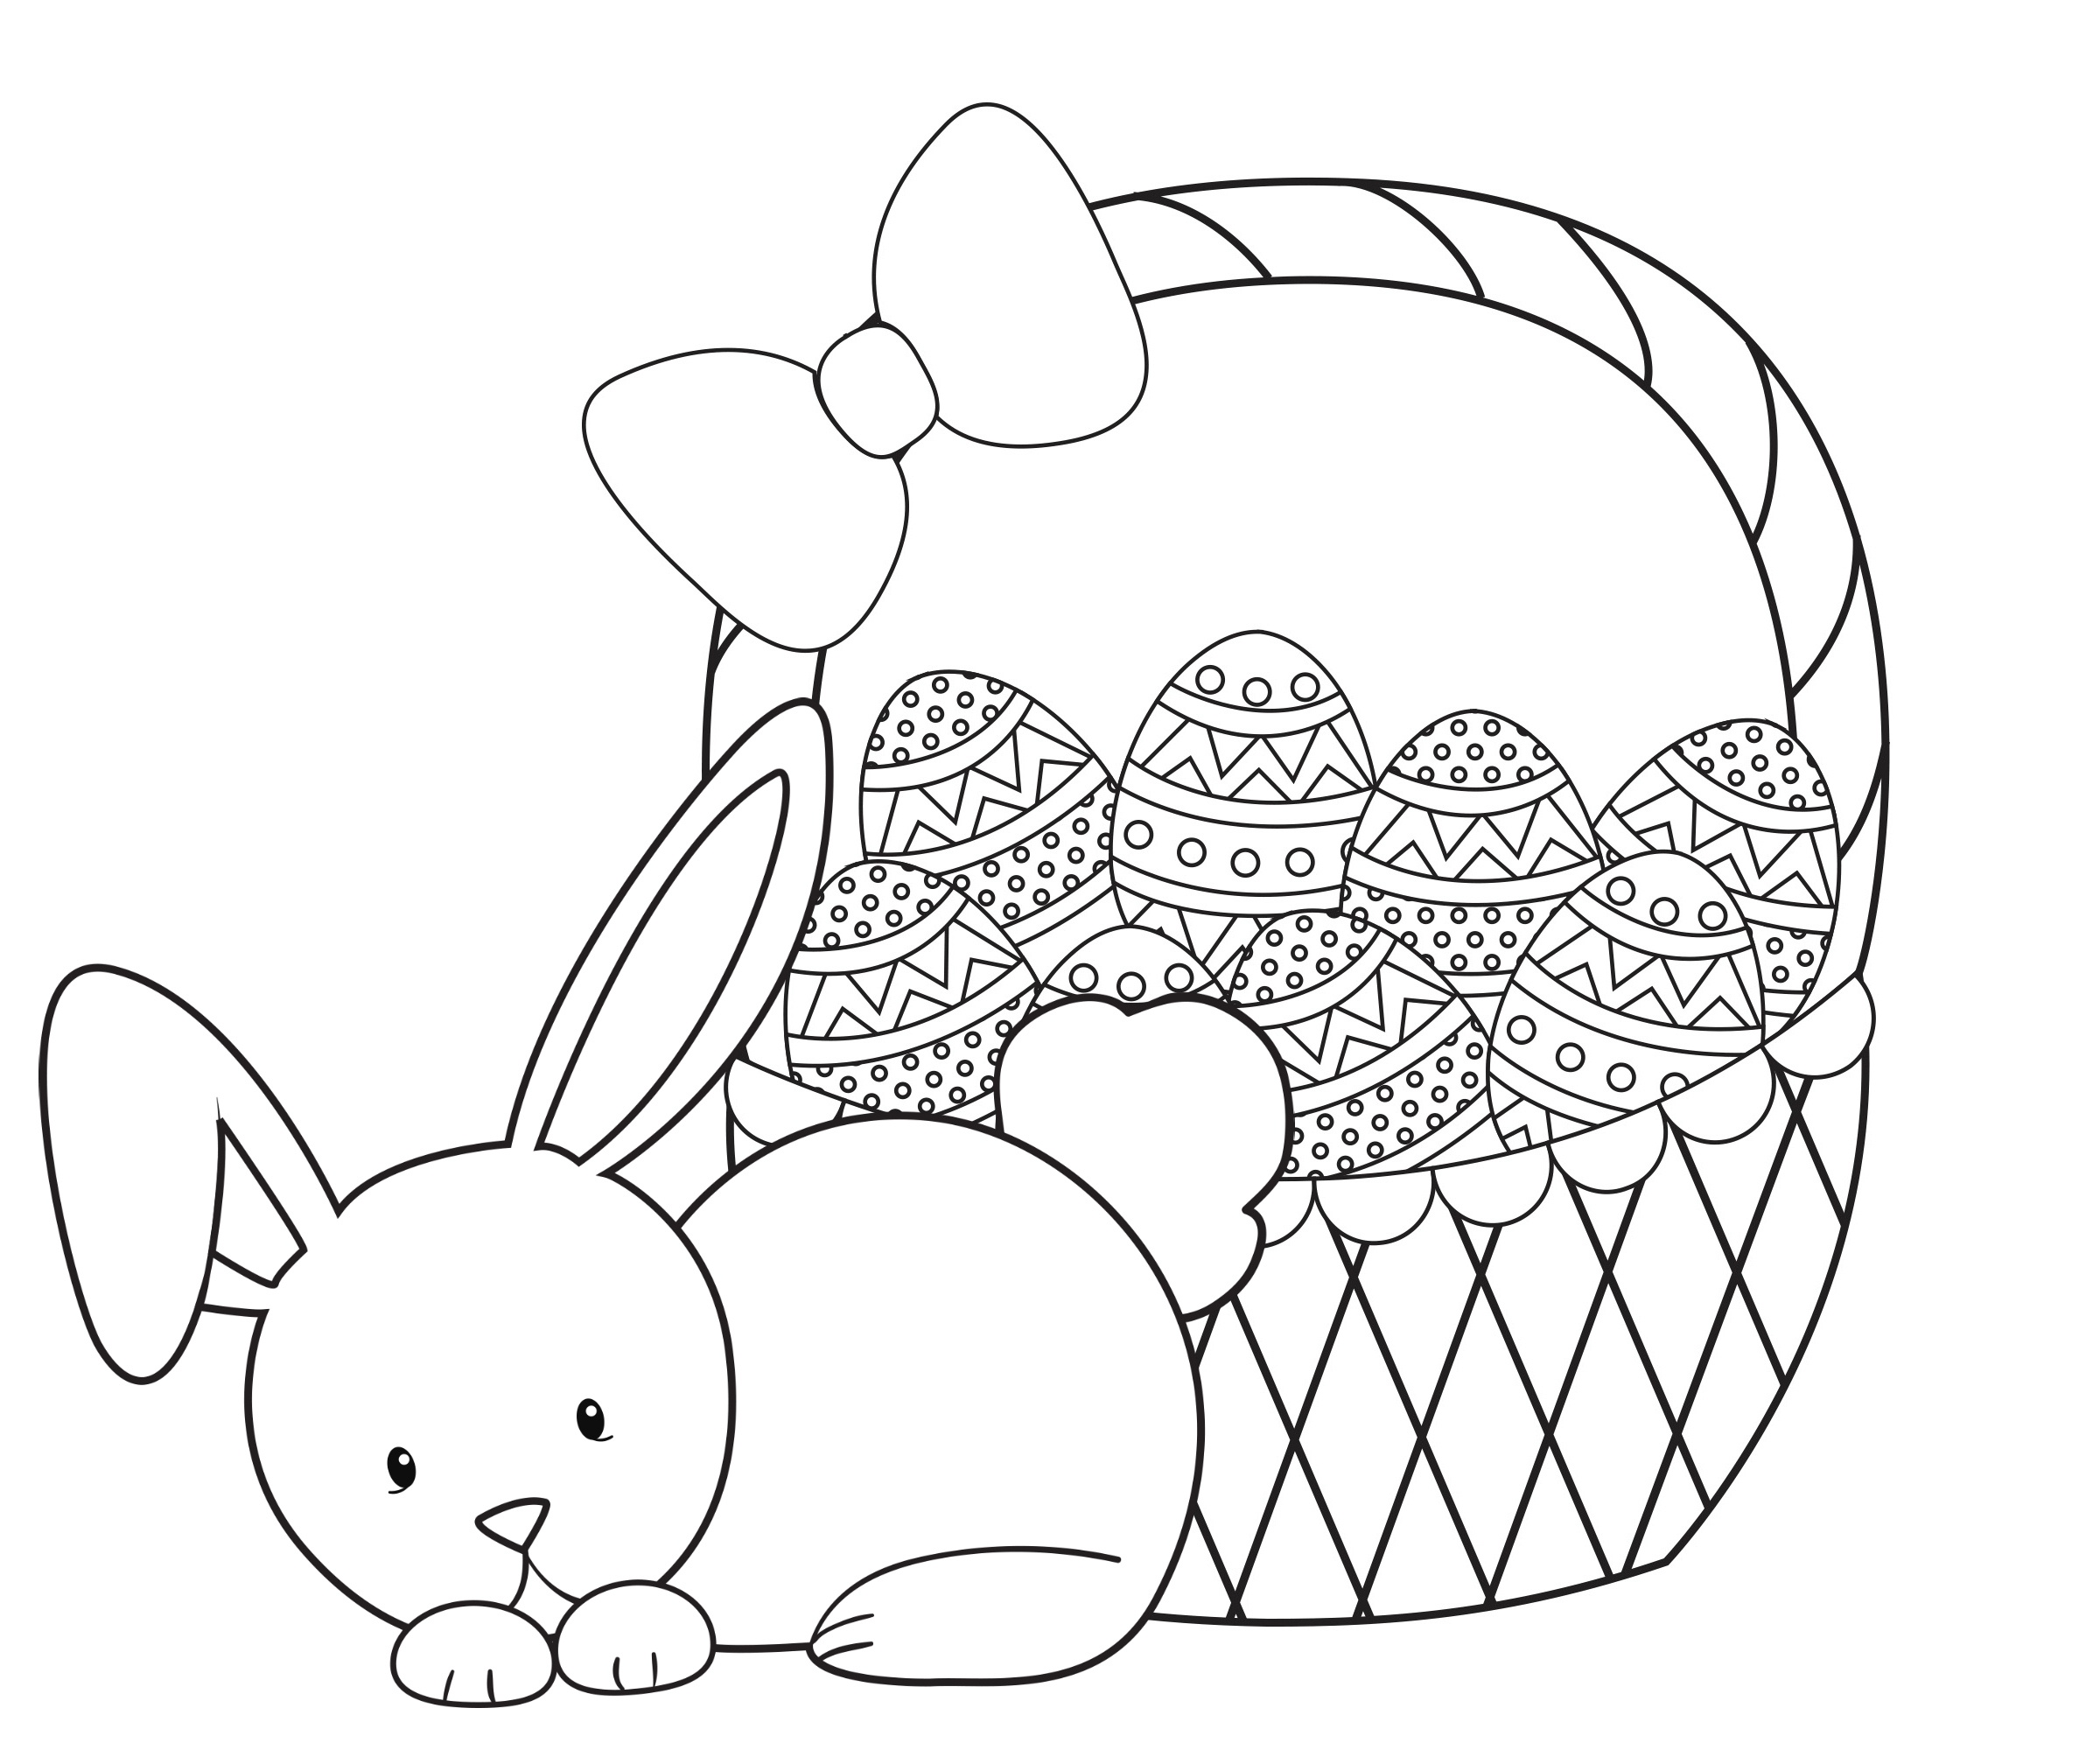 Easter Coloring Pages For Kids - Crazy Little Projects - Free Printable Easter Coloring Pictures